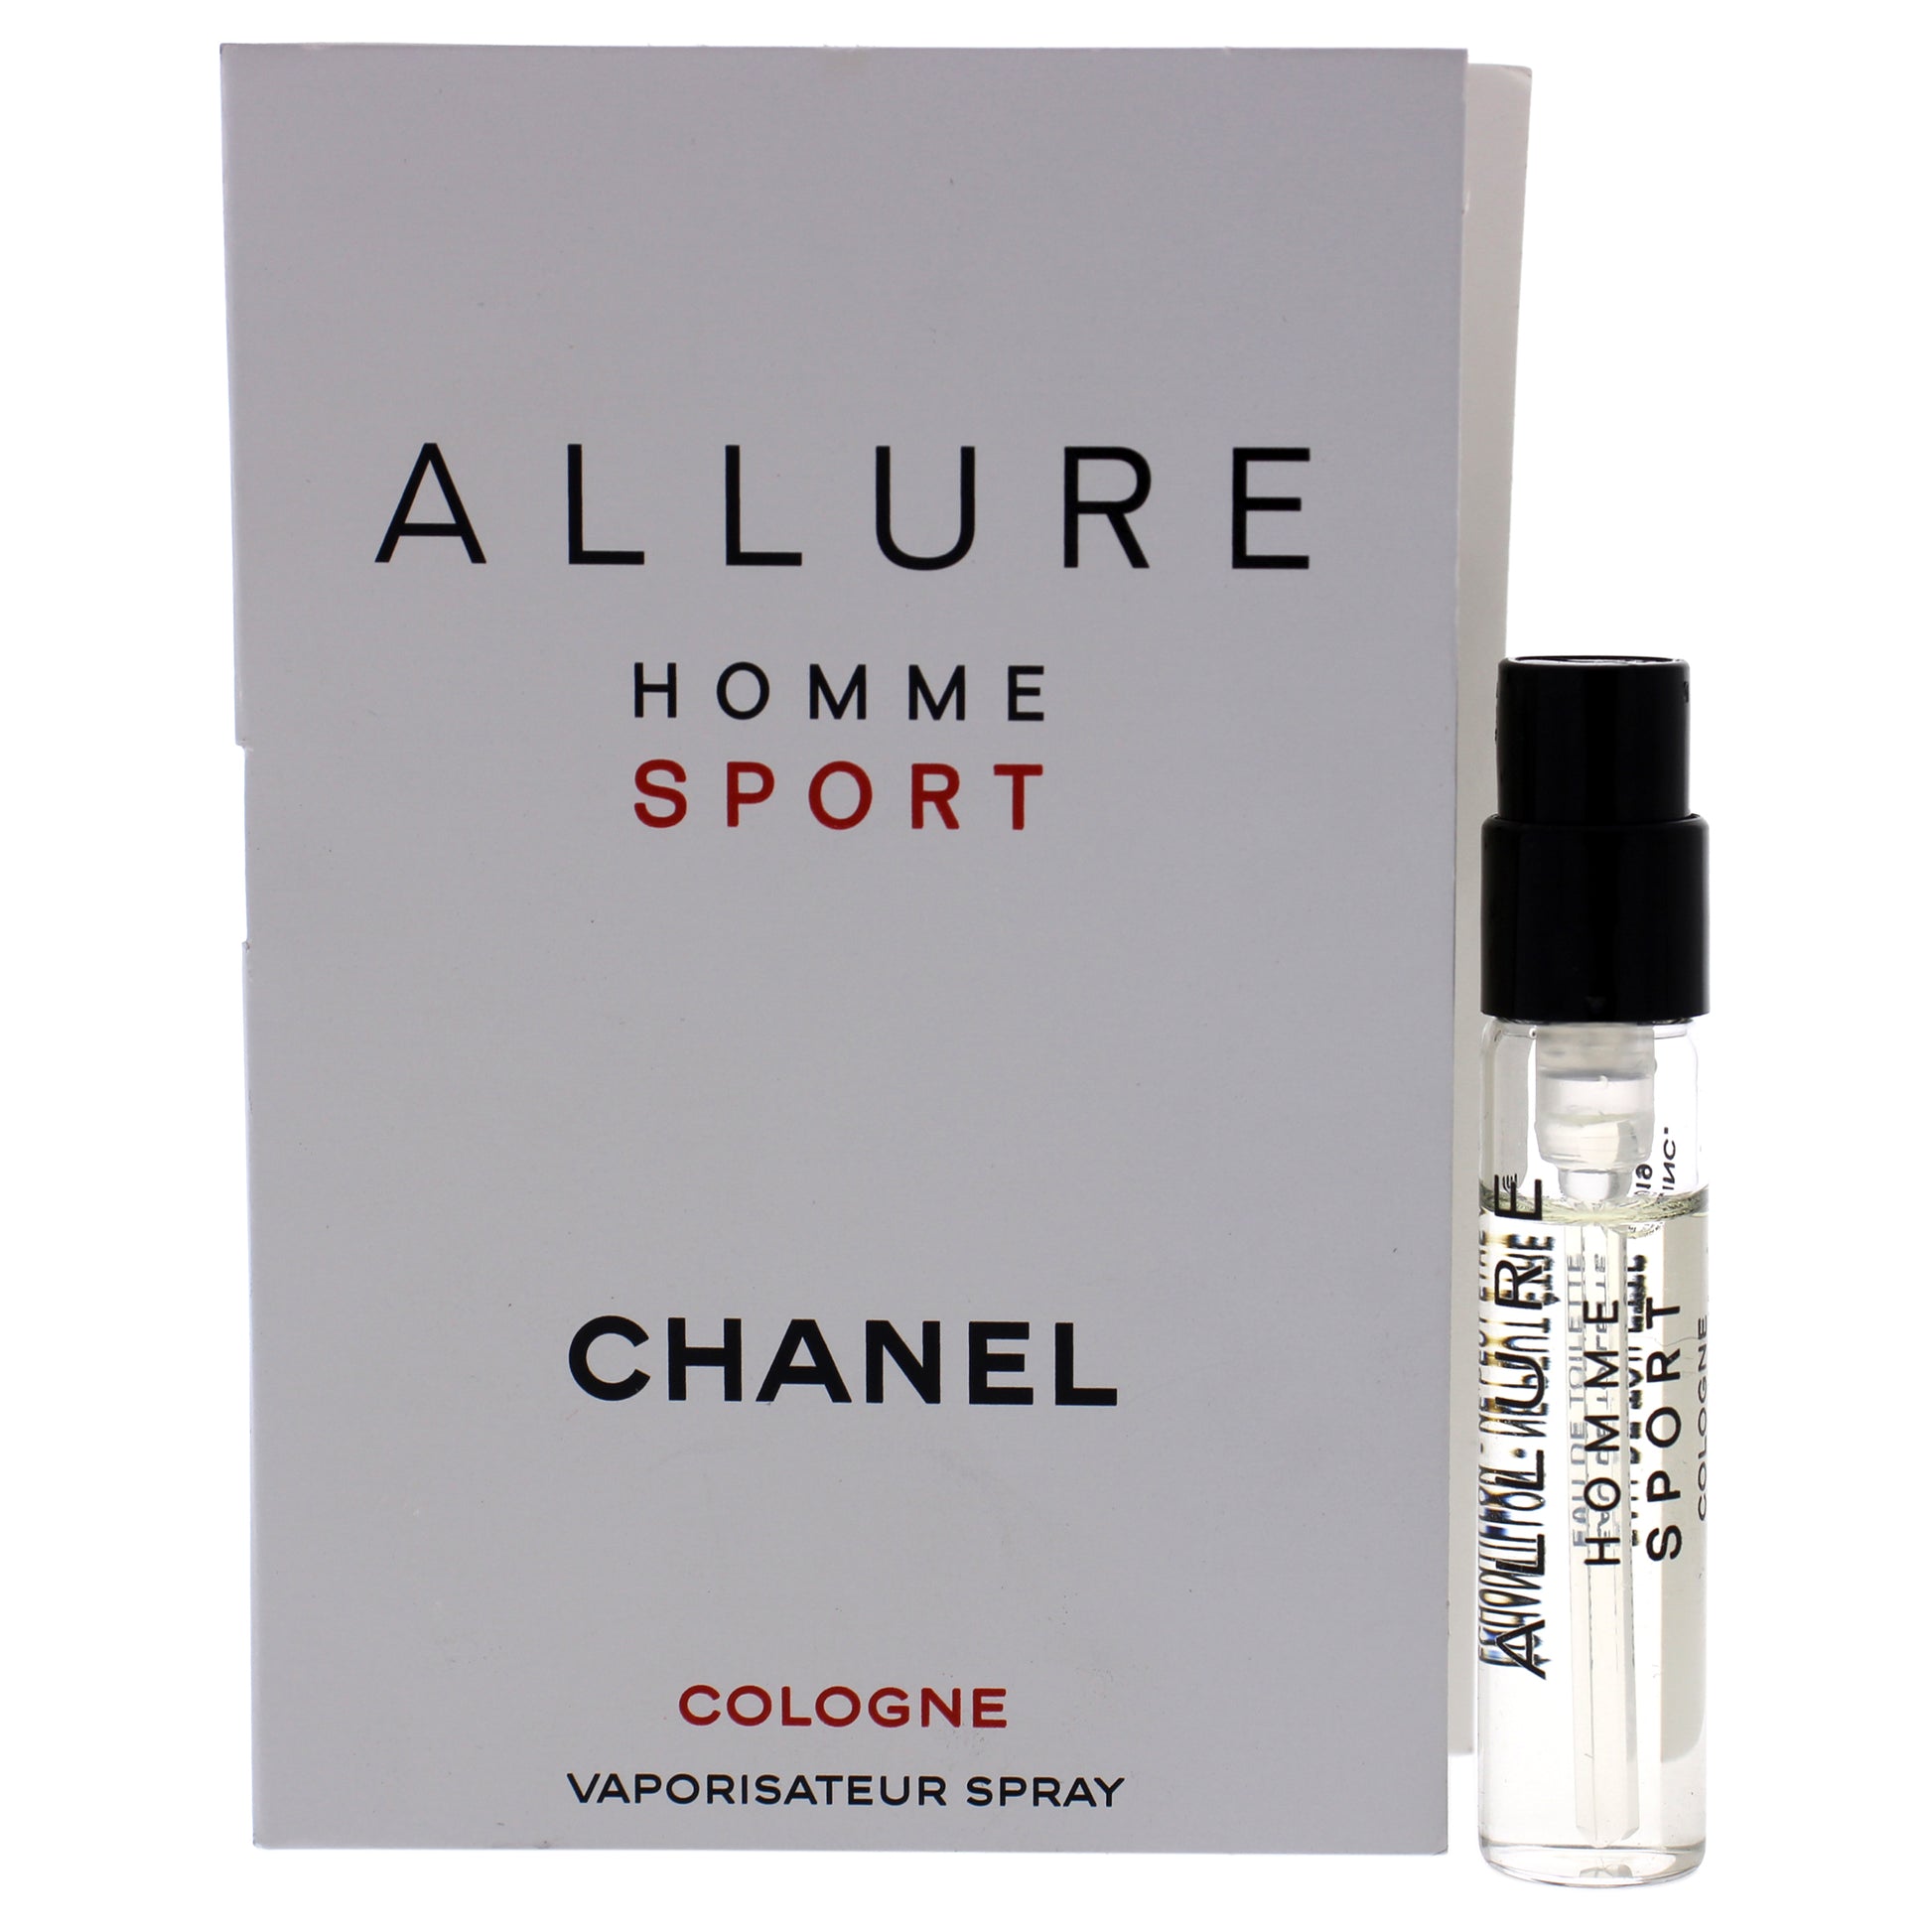 Chanel Allure Homme Sport Cologne 3.4oz/100ml